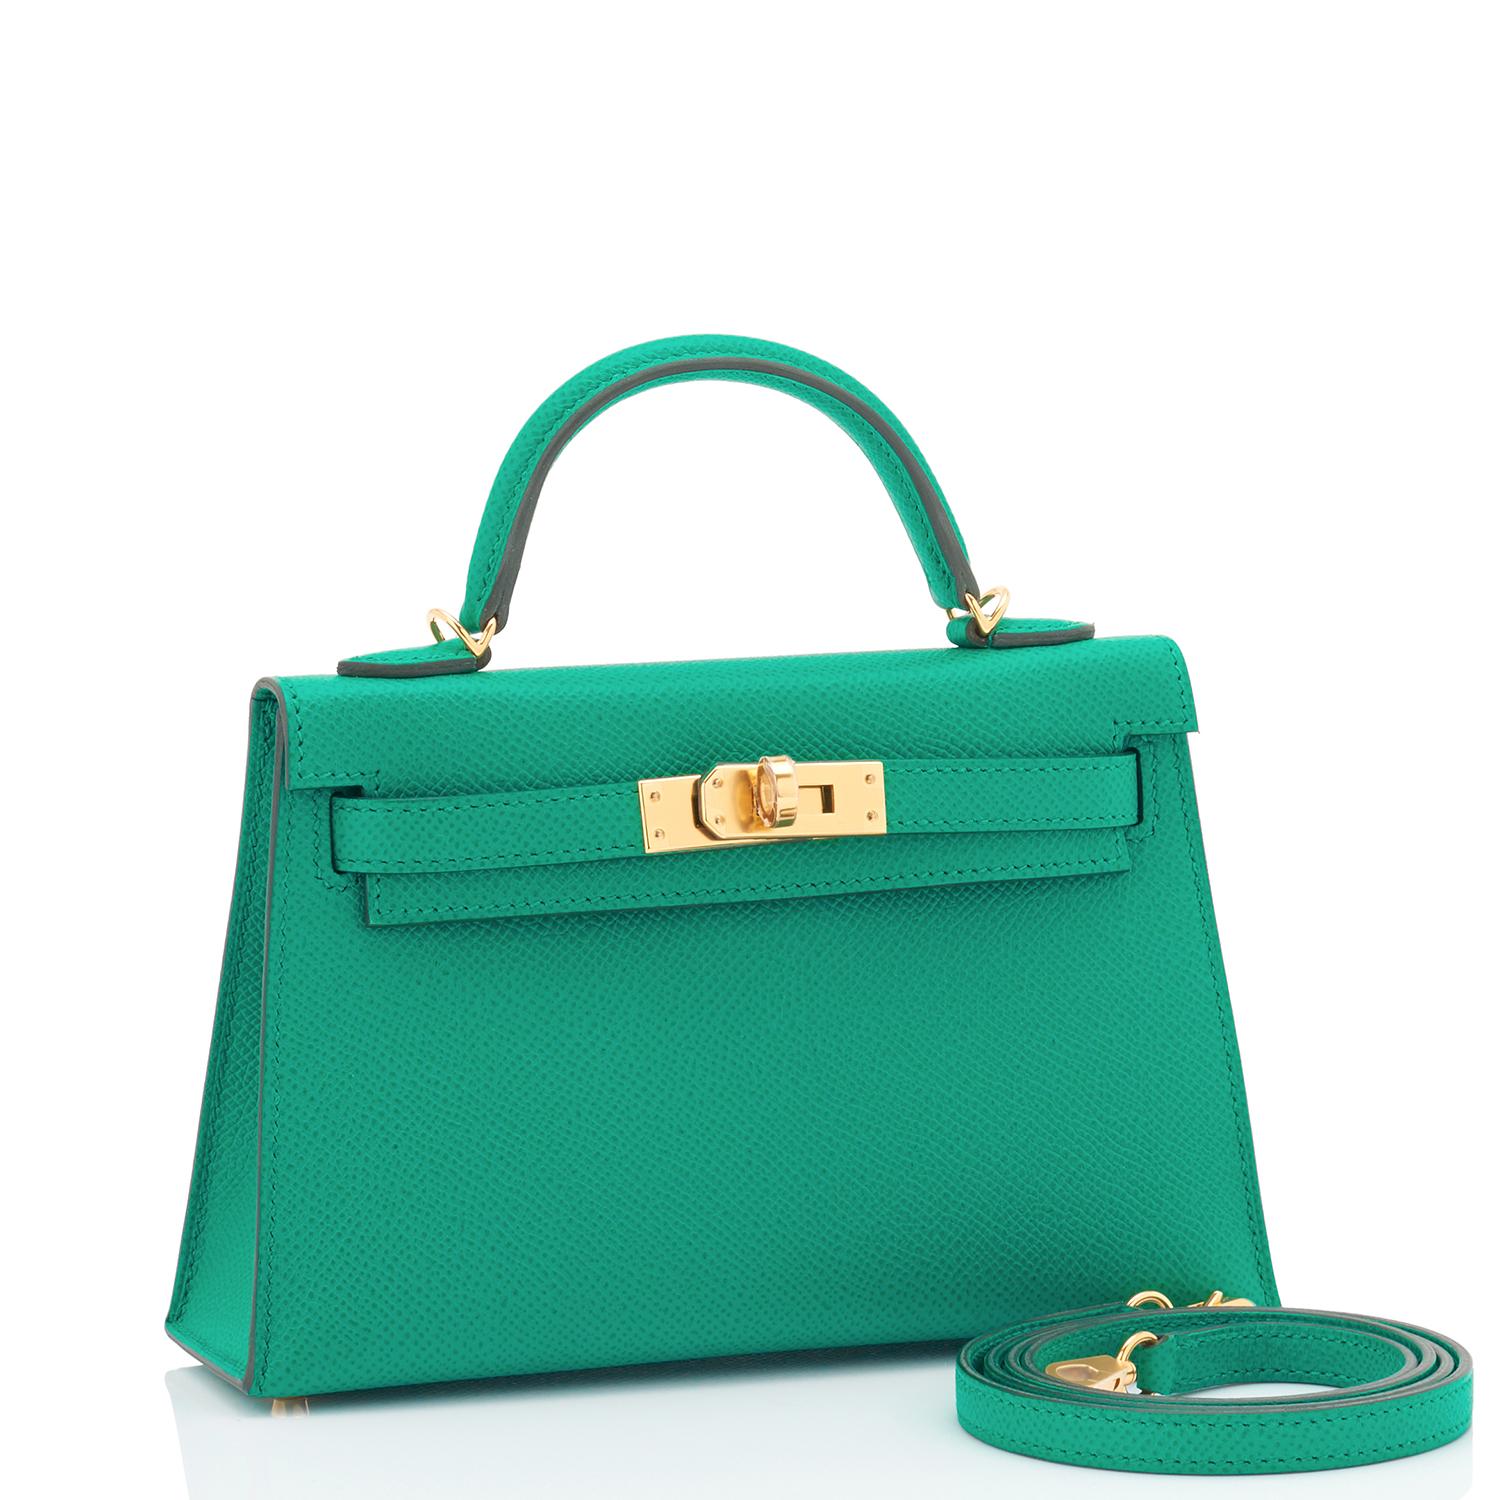 Hermes Mini Kelly 20cm Vert Jade VIP Epsom Gold Shoulder Bag, Z Stamp, 2021 
Just purchased from Hermes store; bag bears new 2021 Z Stamp.
Brand New in Box.  Store Fresh. Pristine Condition (with plastic on hardware)
Perfect gift! Comes full set